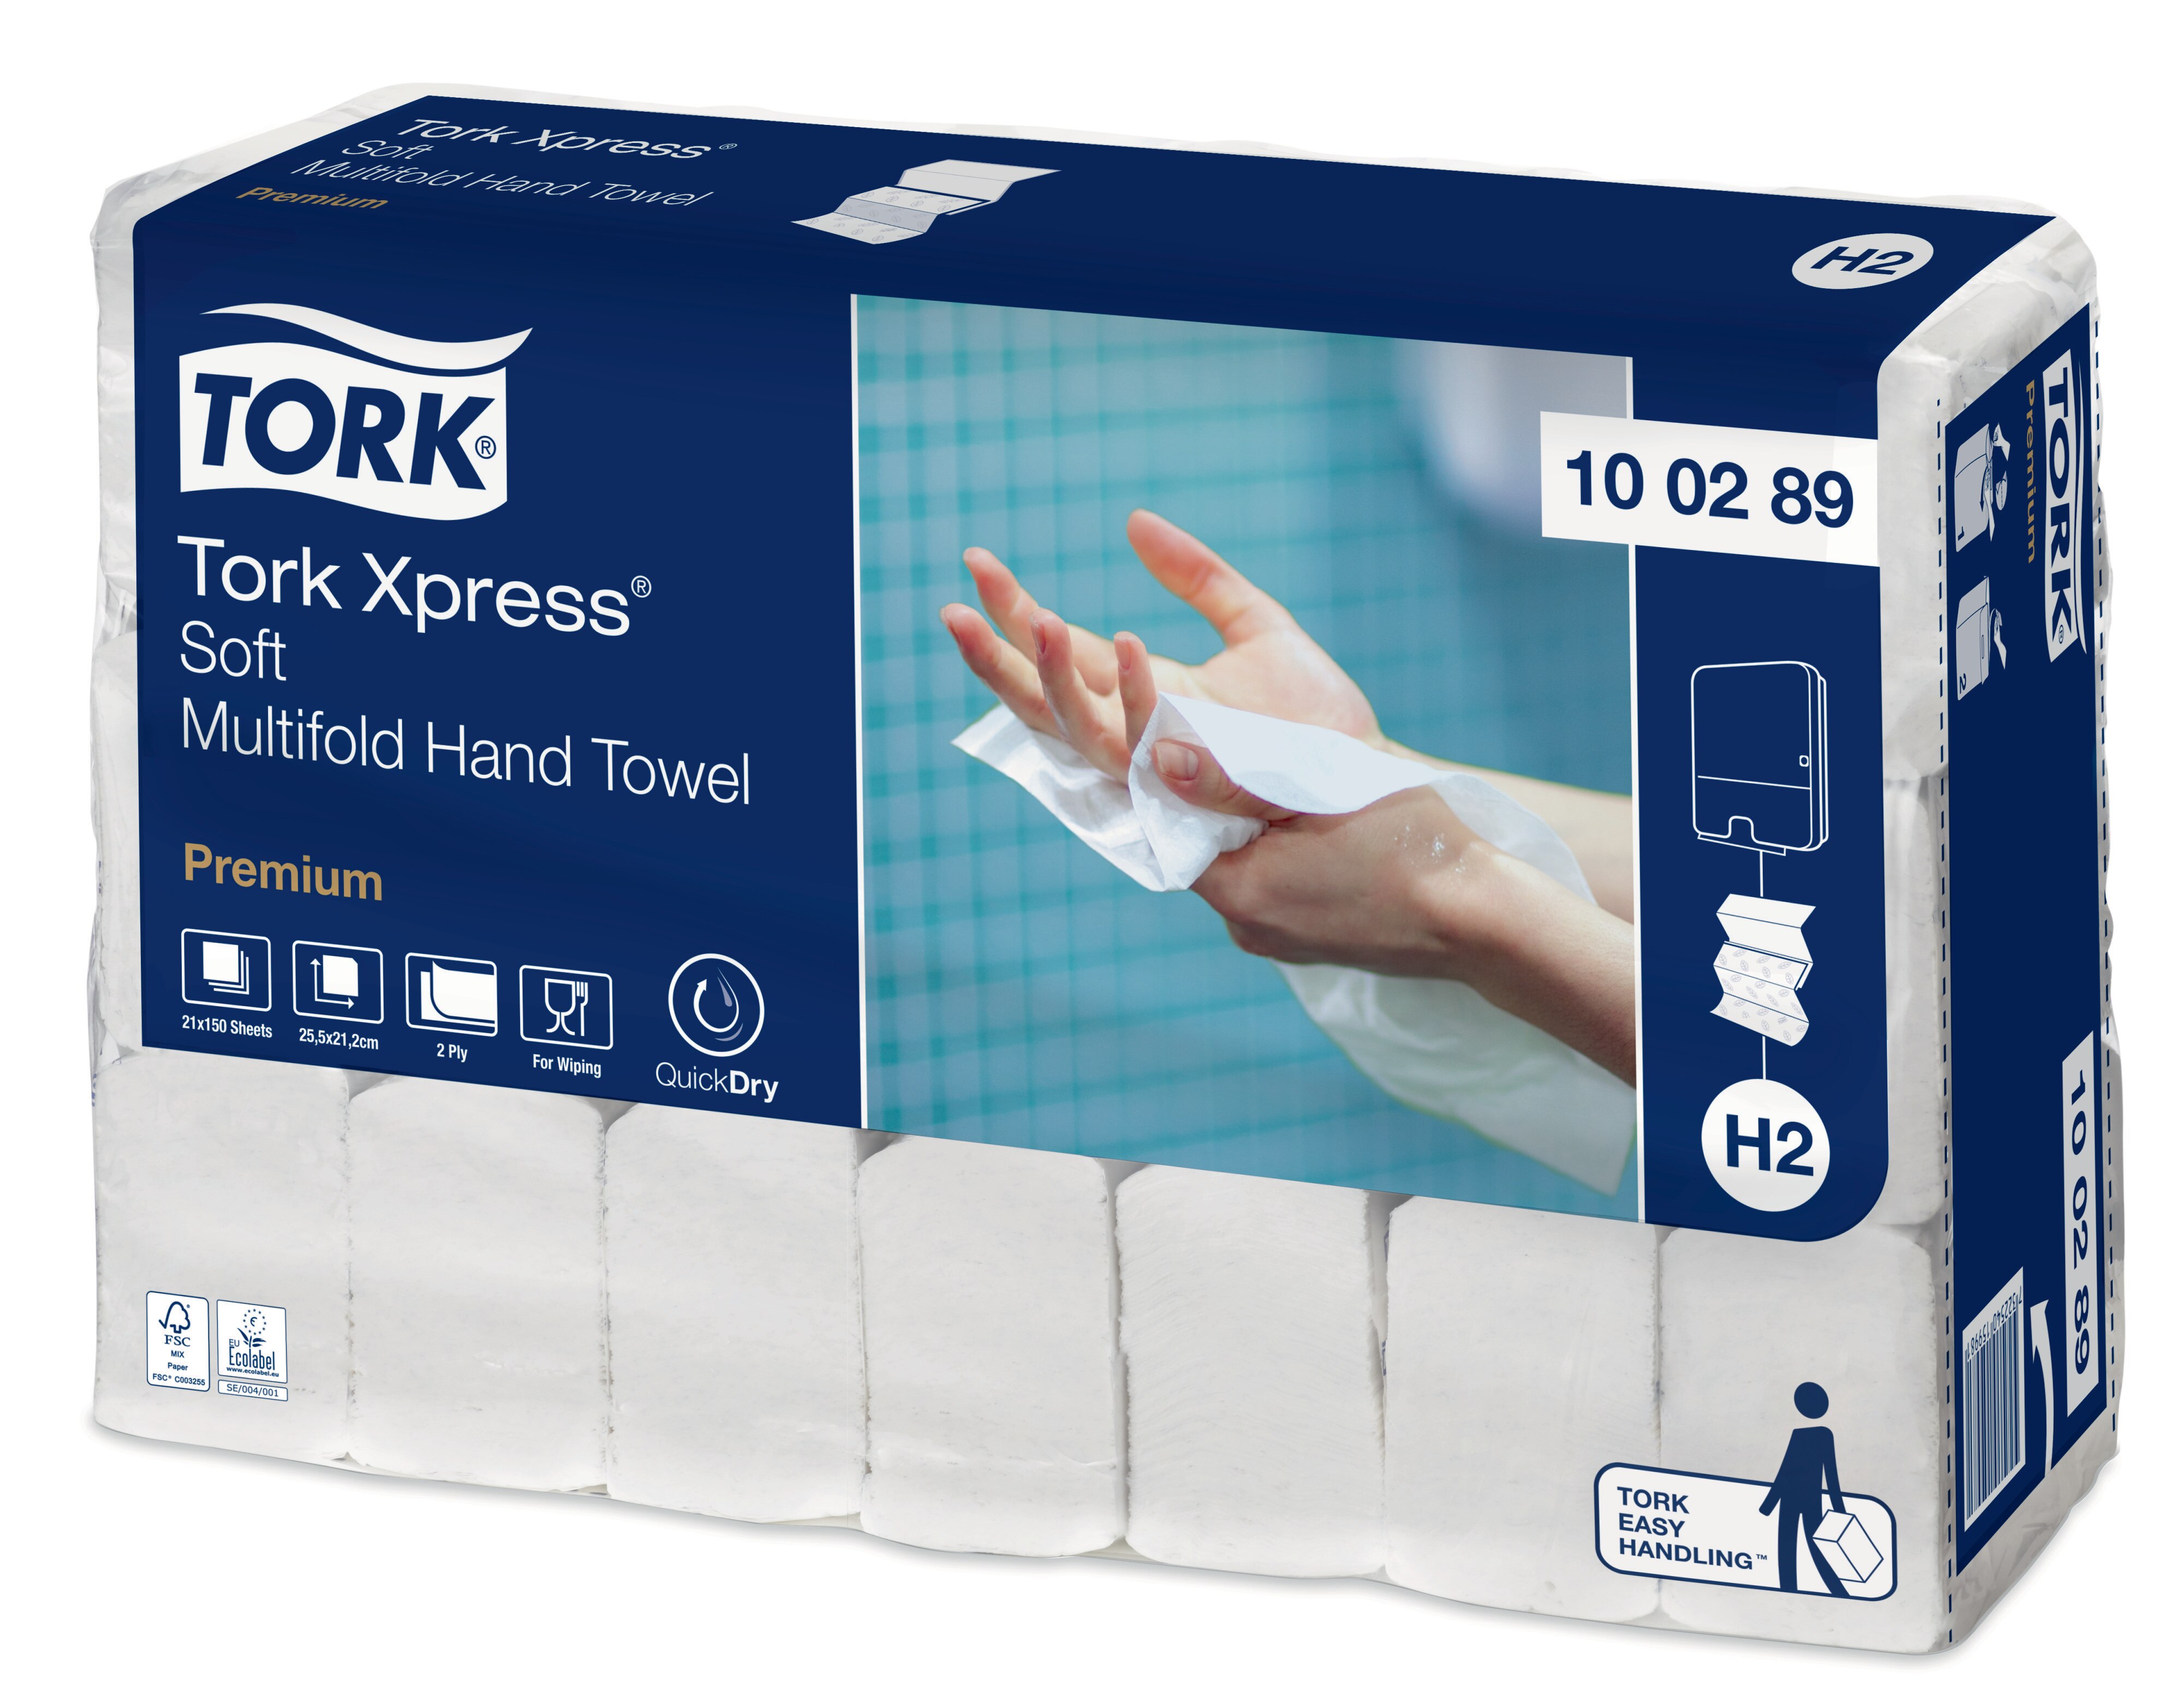 Tork Xpress Soft Multifold Hand Towel - Case of 21x150 Sheets - 100289